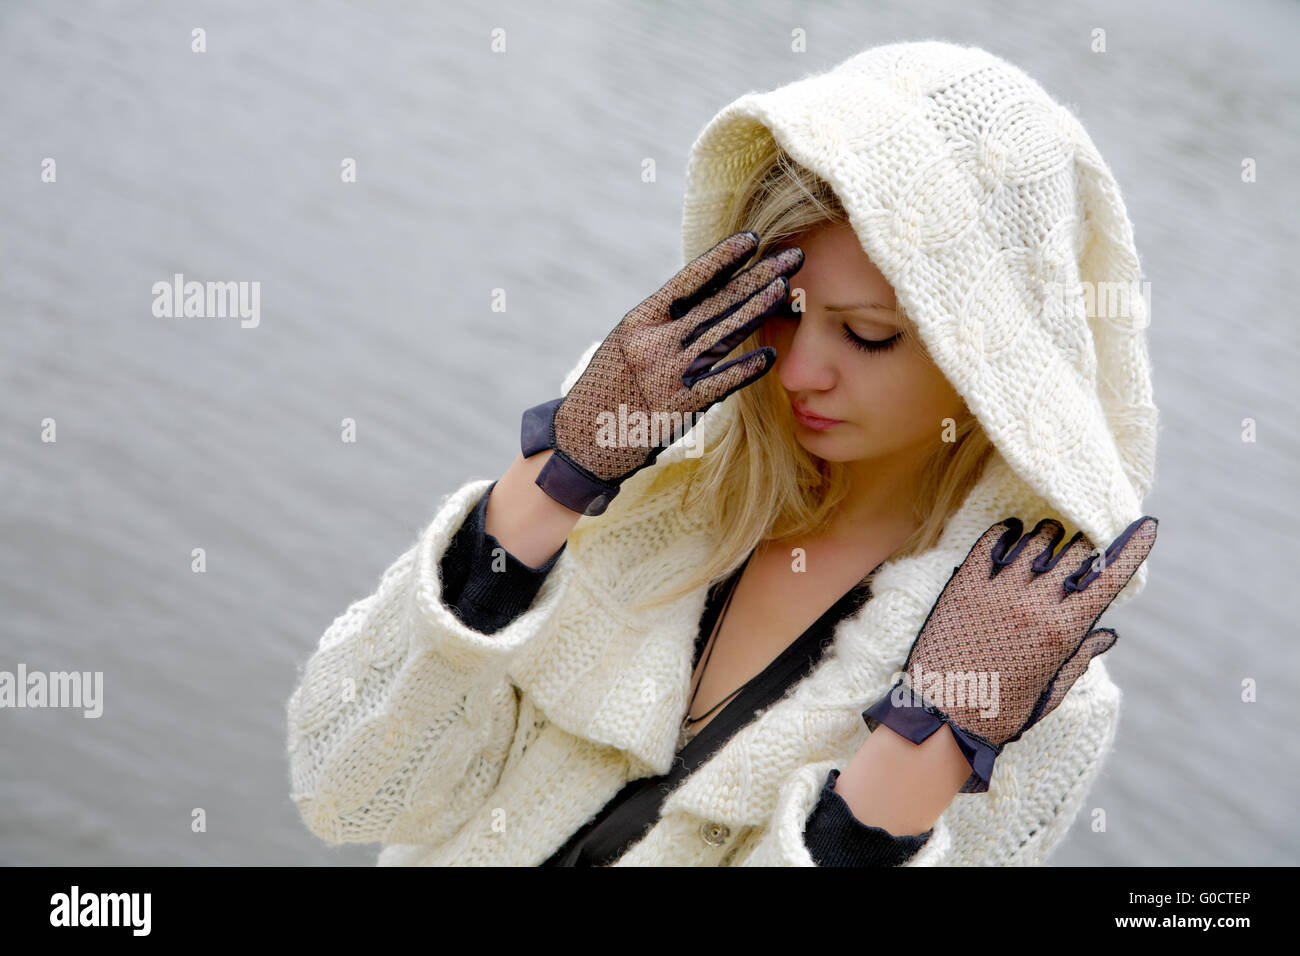 The girl in despair and grief against the river Stock Photo